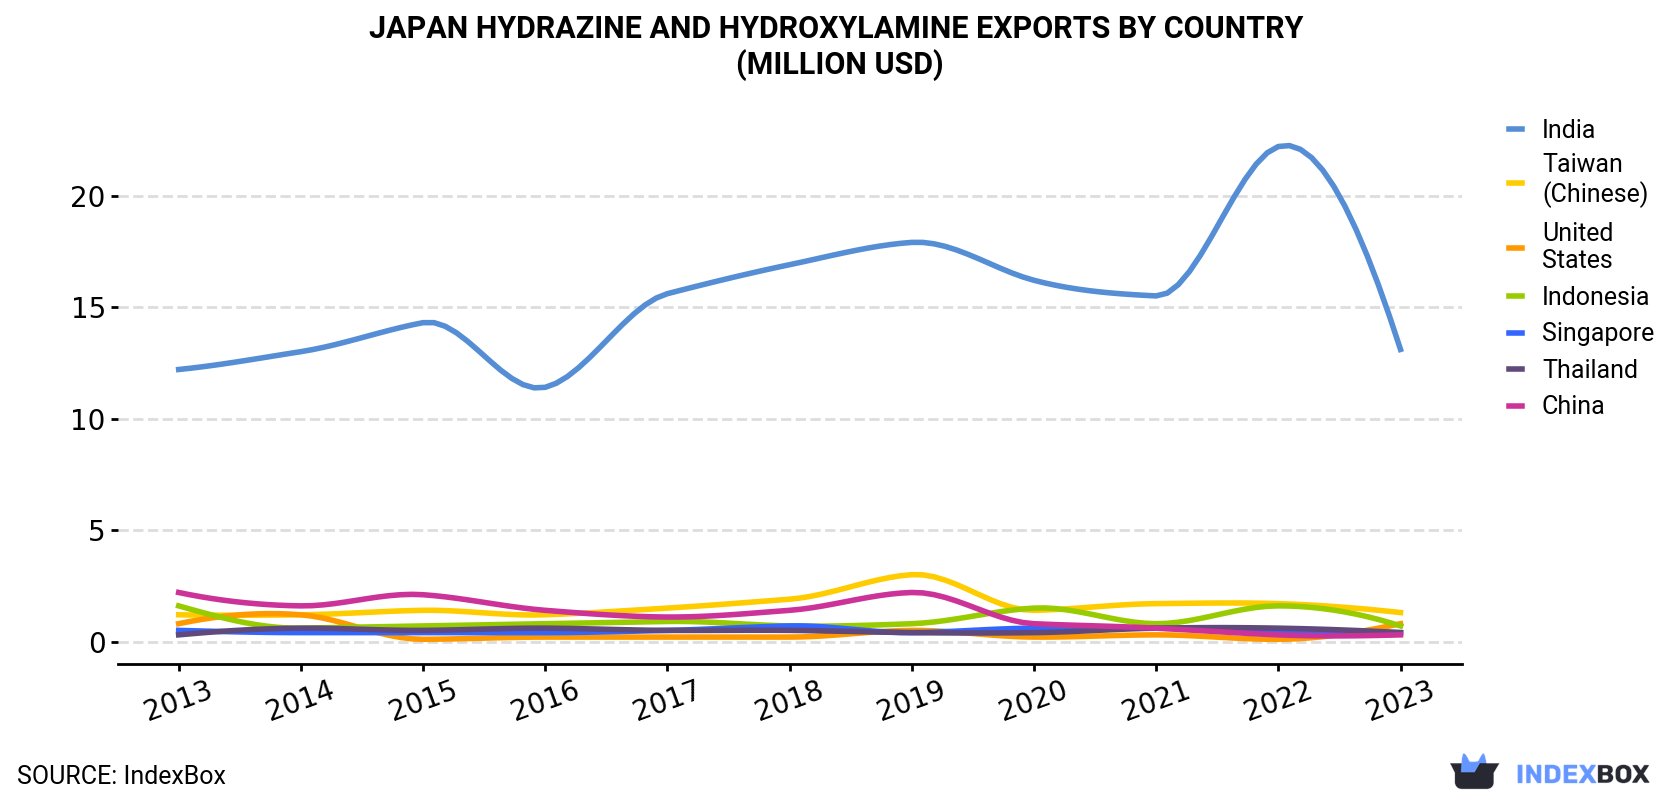 Japan Hydrazine And Hydroxylamine Exports By Country (Million USD)